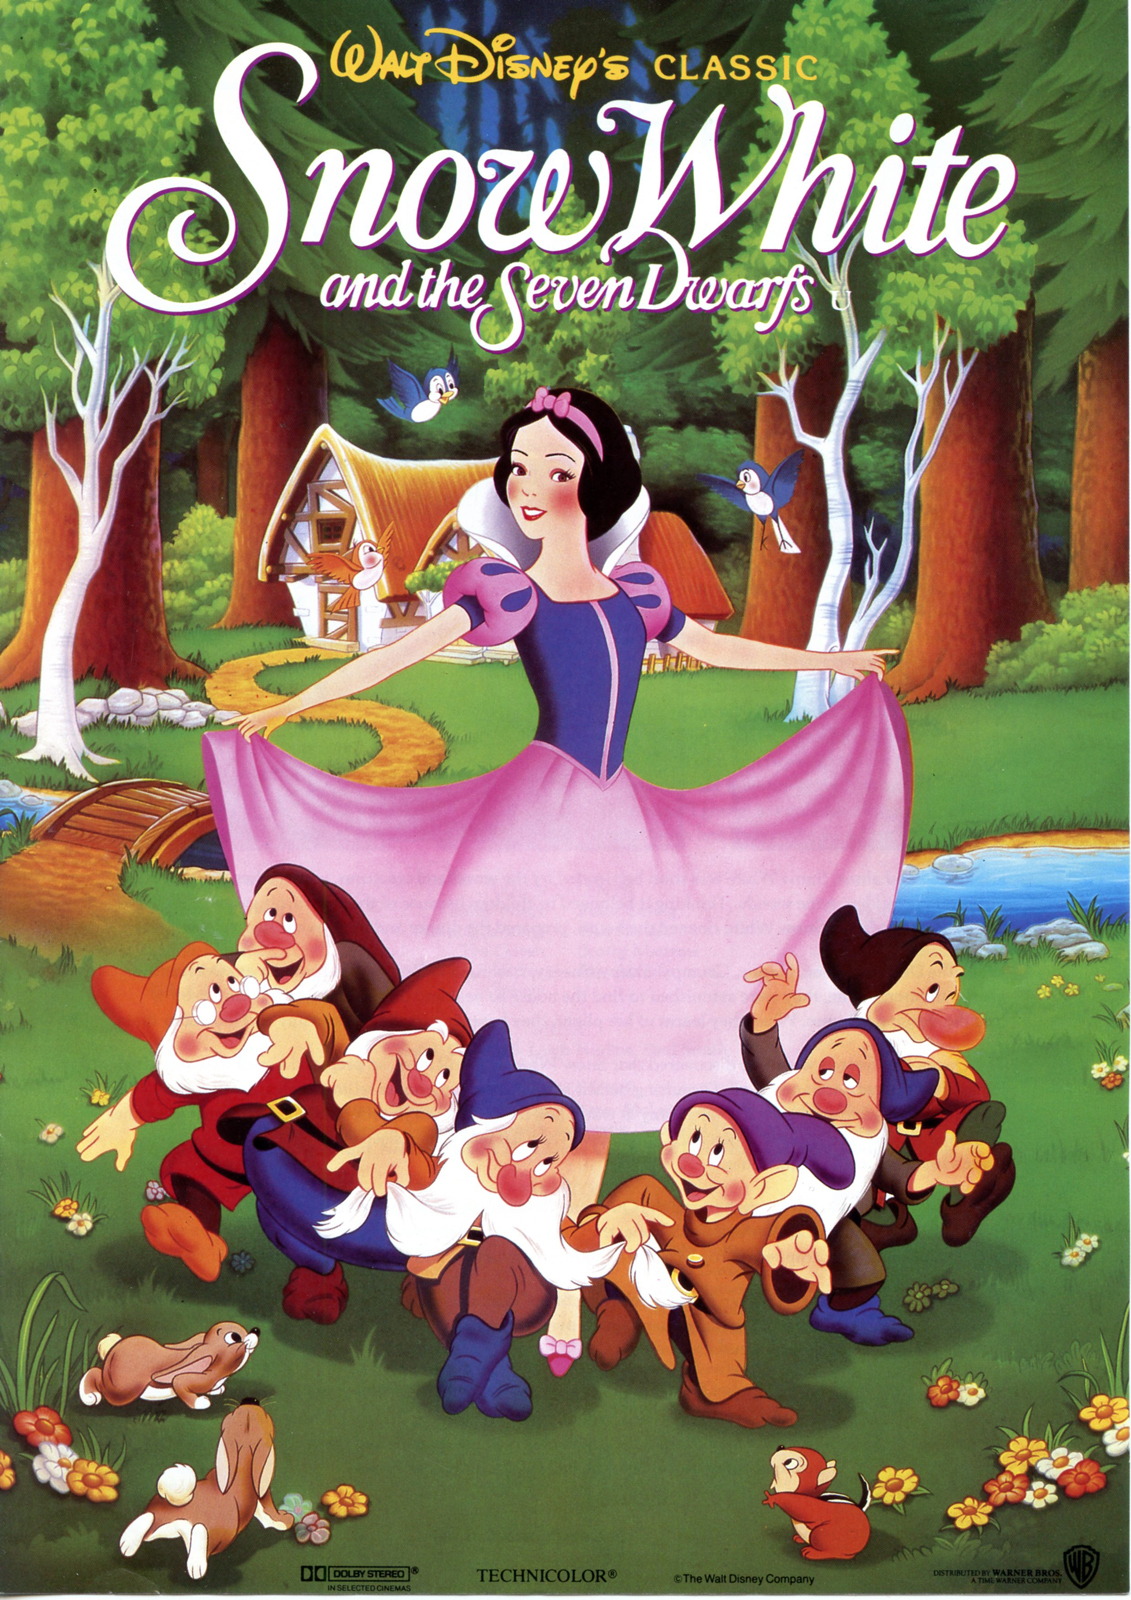 Filmic Light - Snow White Archive: Snow White Play-Doh